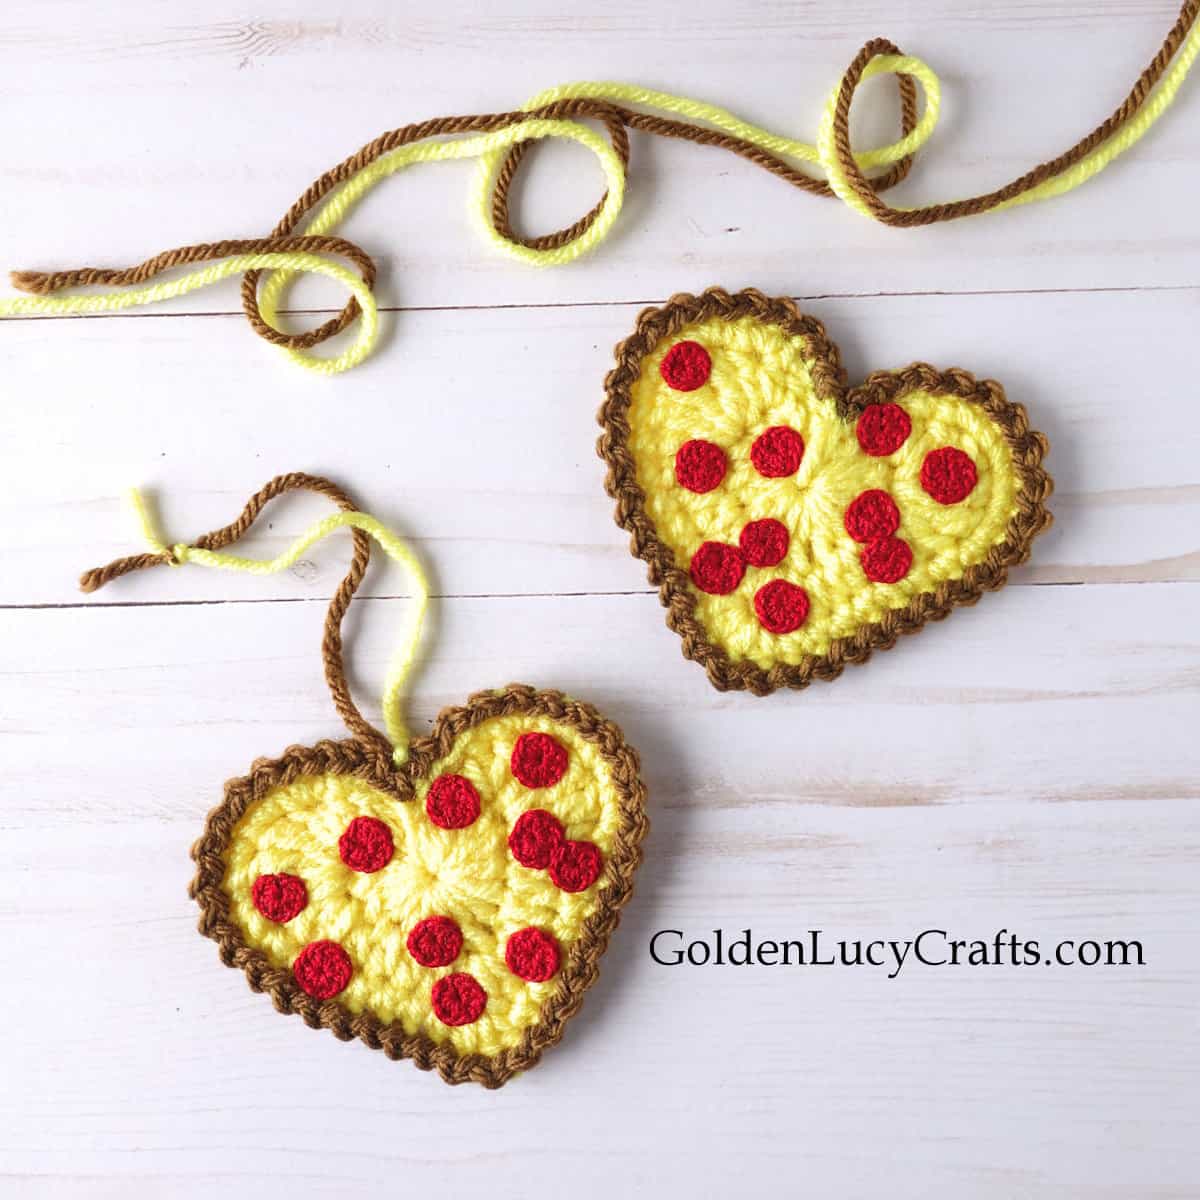 Two crocheted heart-shaped pizza appliques.